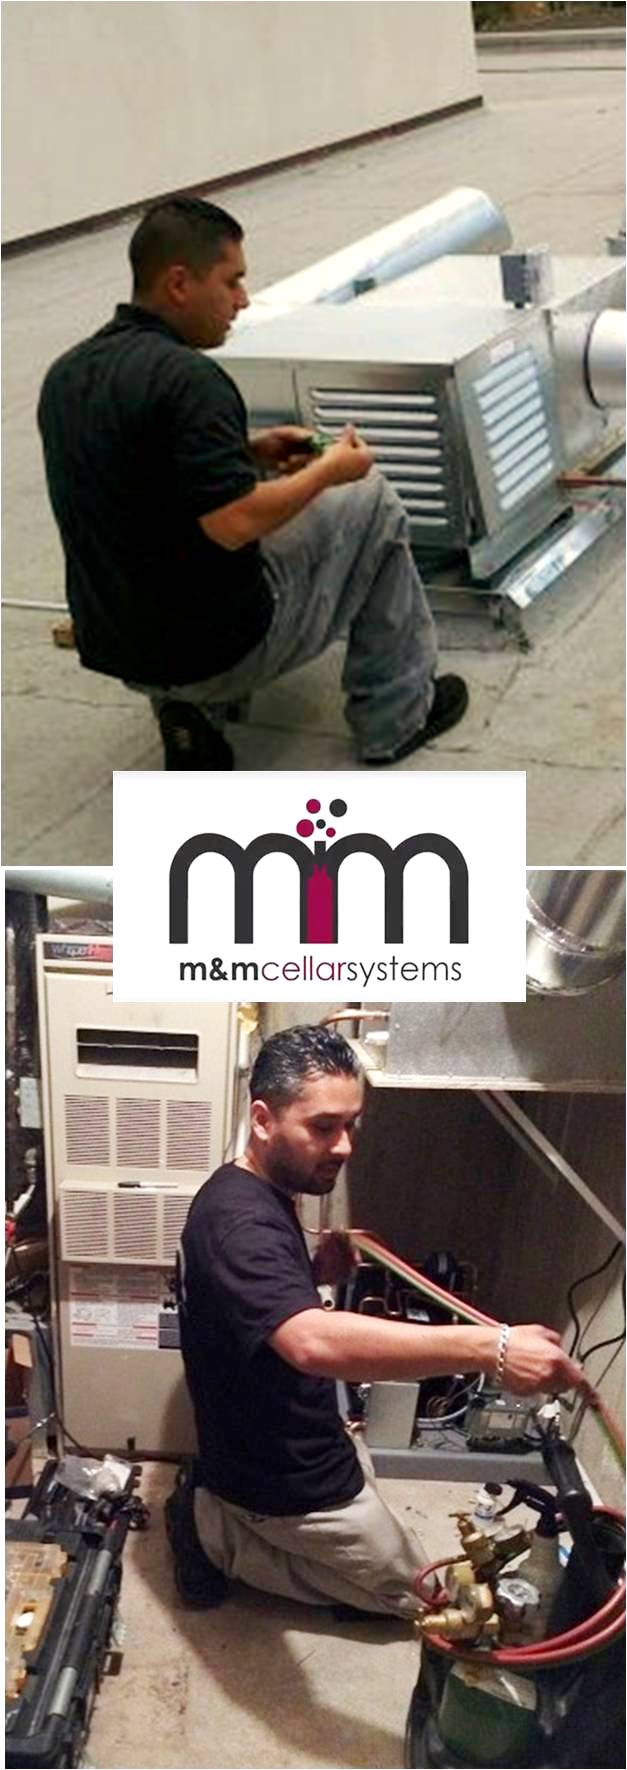 Mario Morales M&M Cellar Systems Refrigeration Expert in Seattle